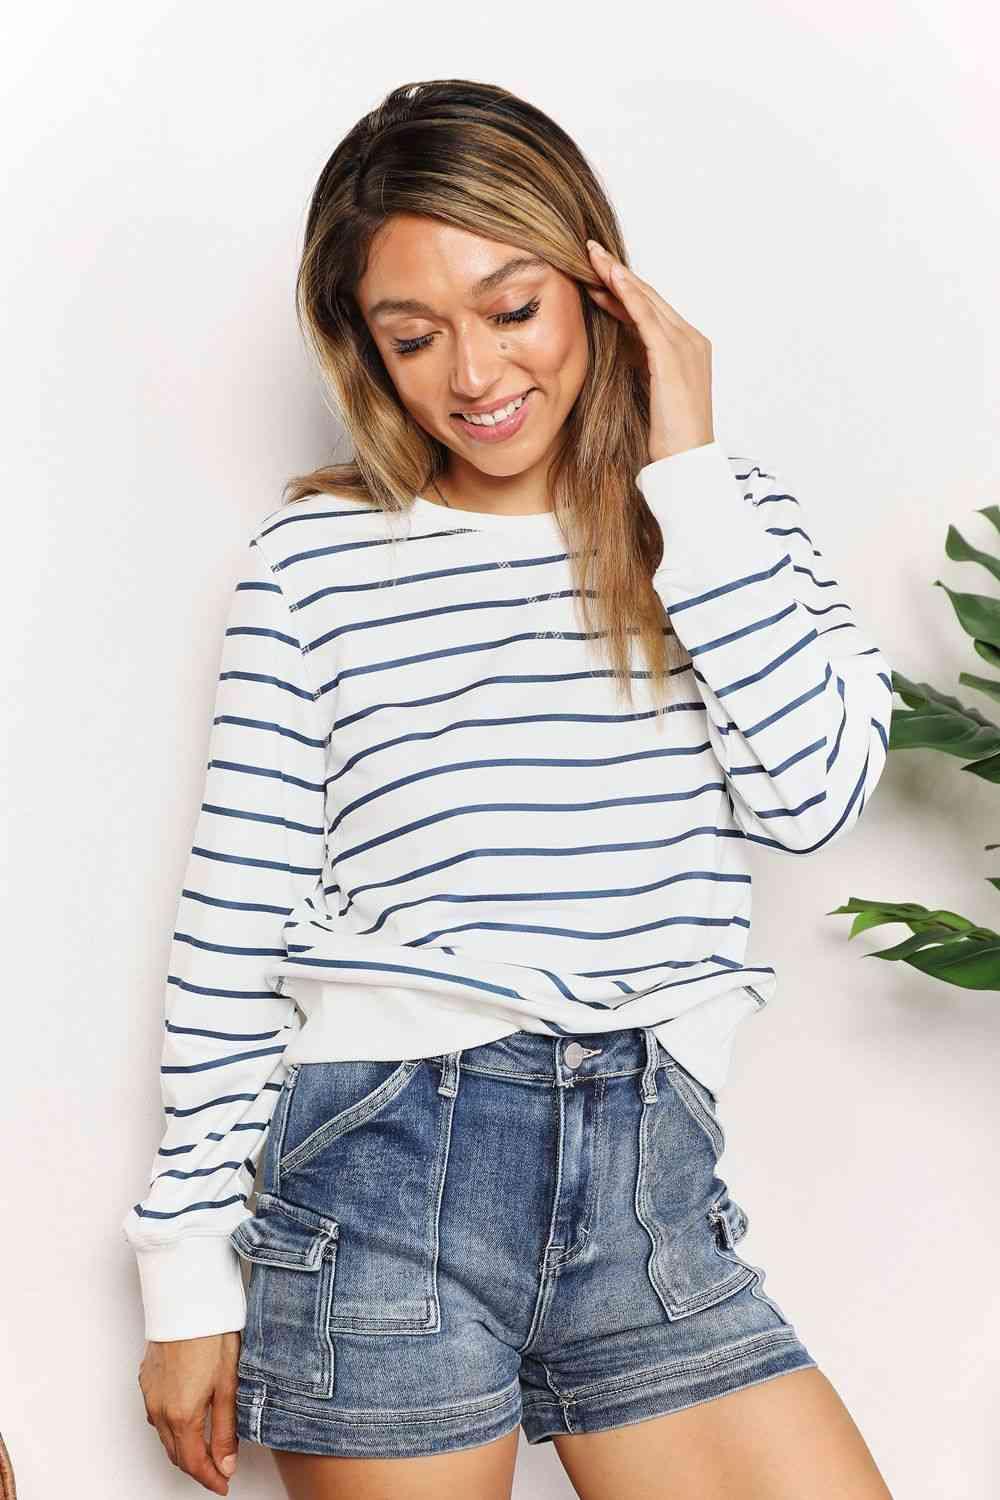 Double Take Striped Long Sleeve Round Neck Top - Happily Ever Atchison Shop Co.